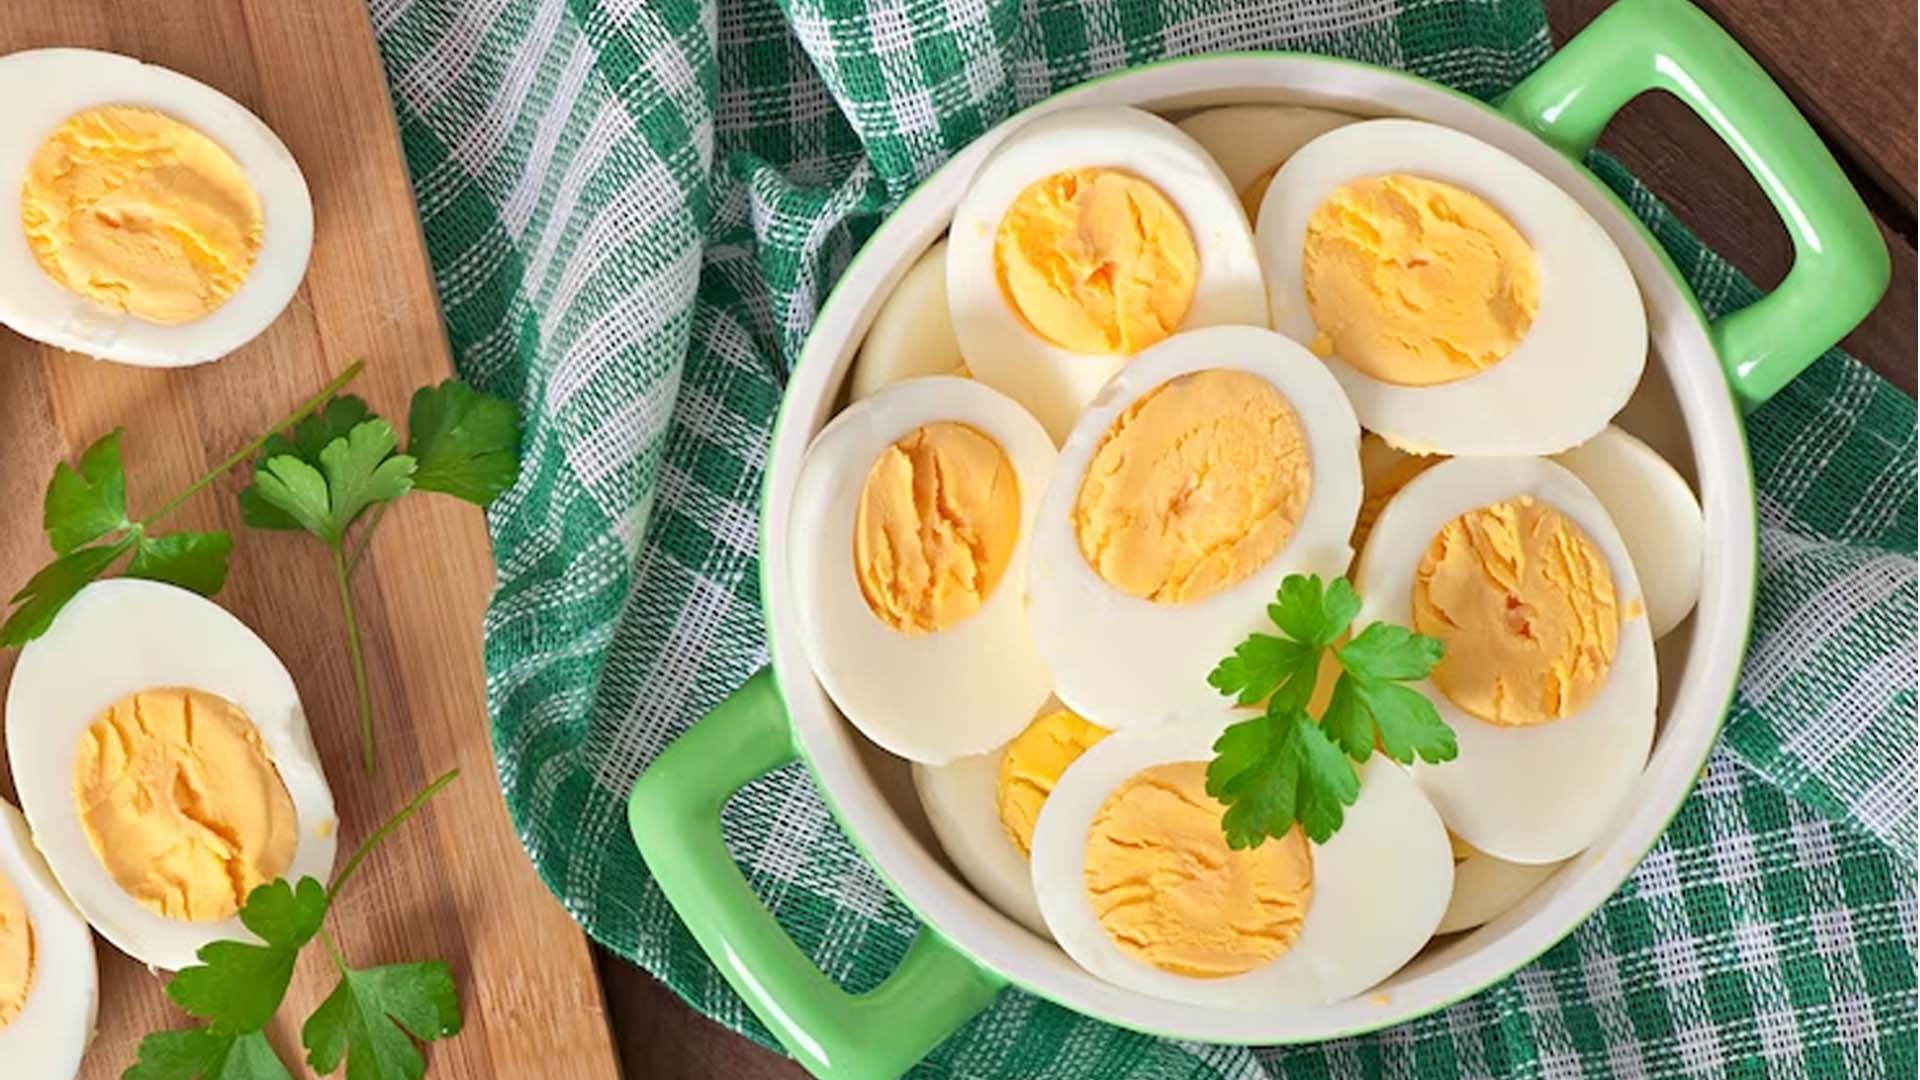 Do Eggs Cause Constipation?